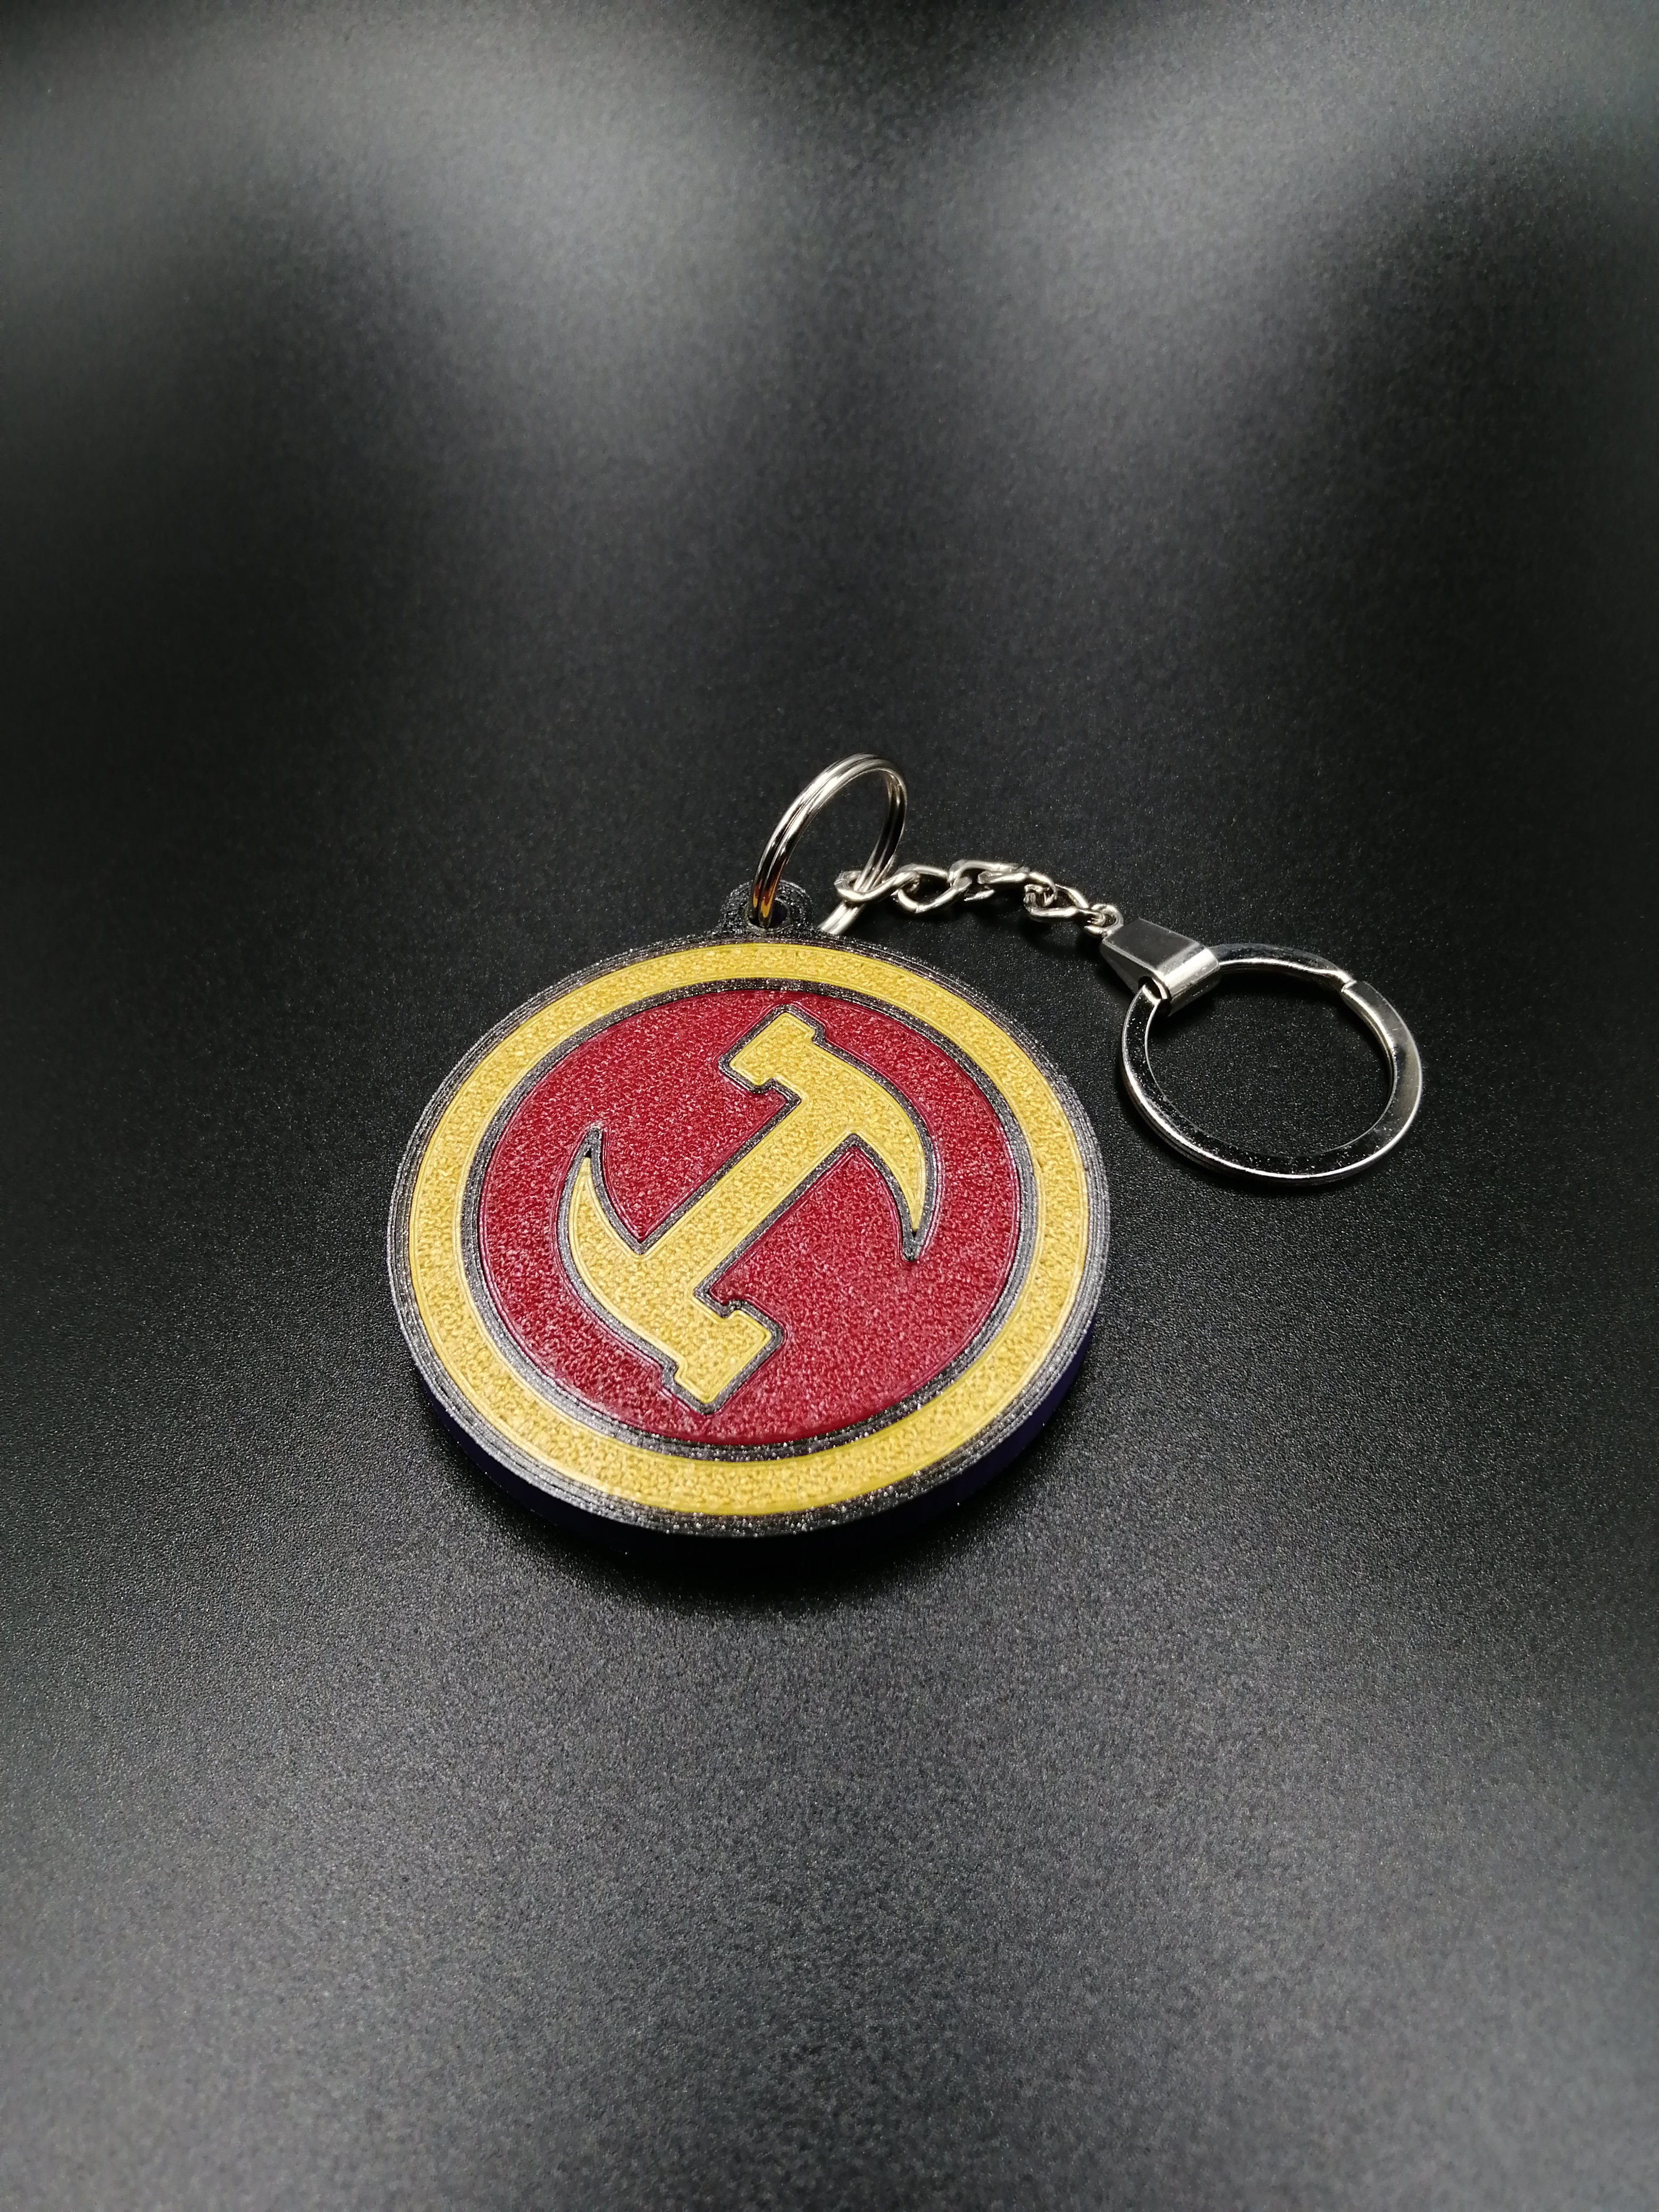 StoneCutters KeyChain